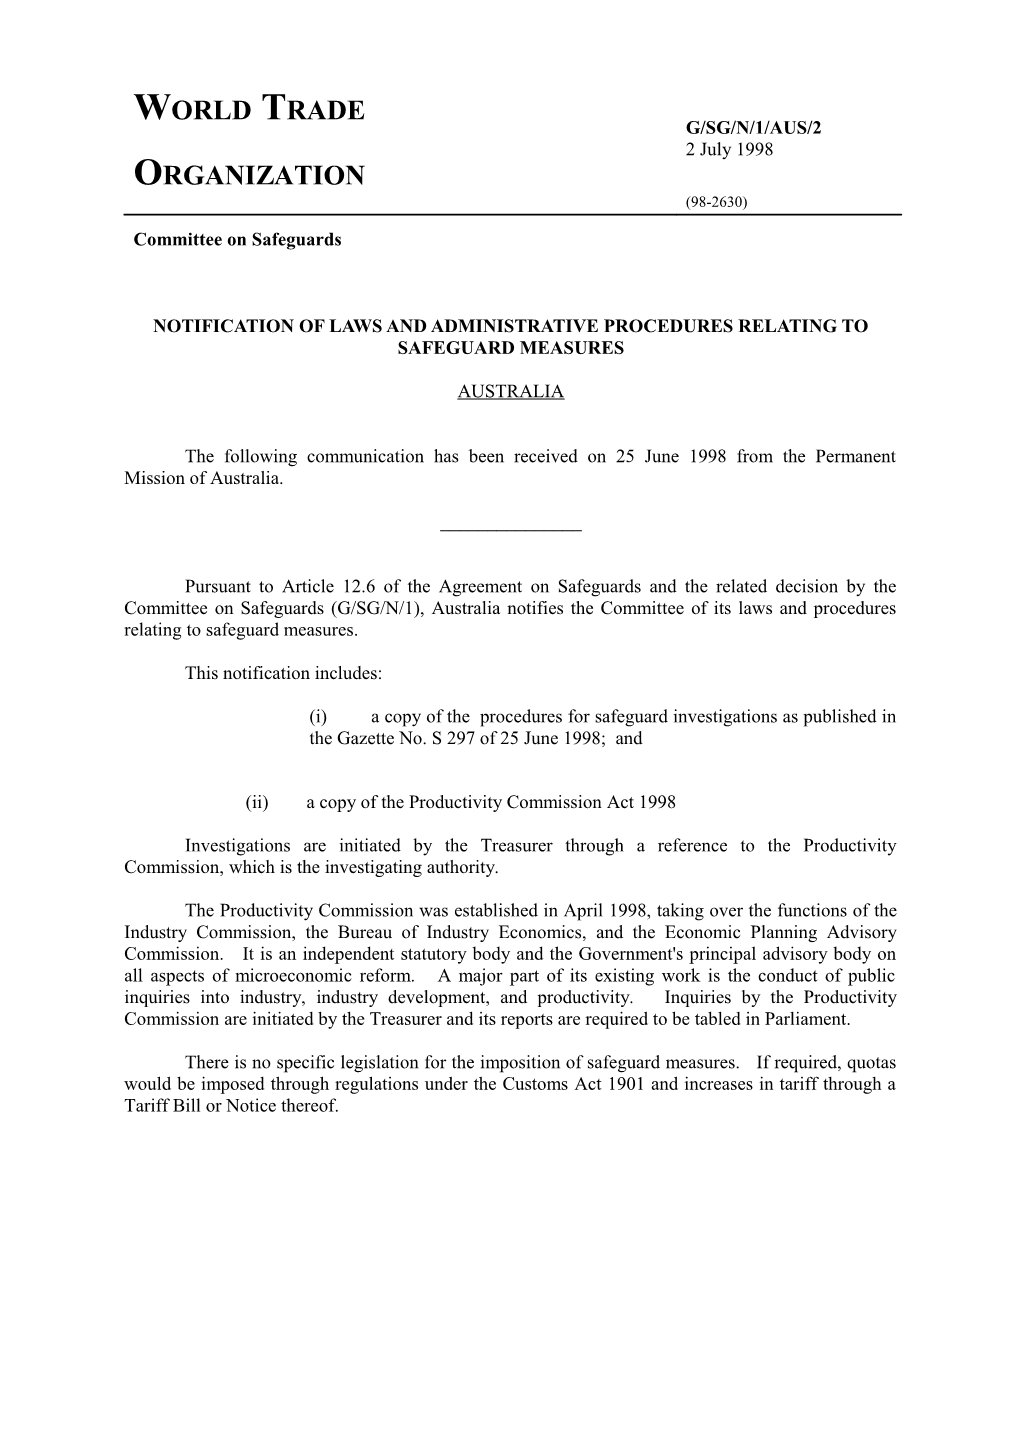 Notification of Laws and Administrative Procedures Relating to Safeguard Measures